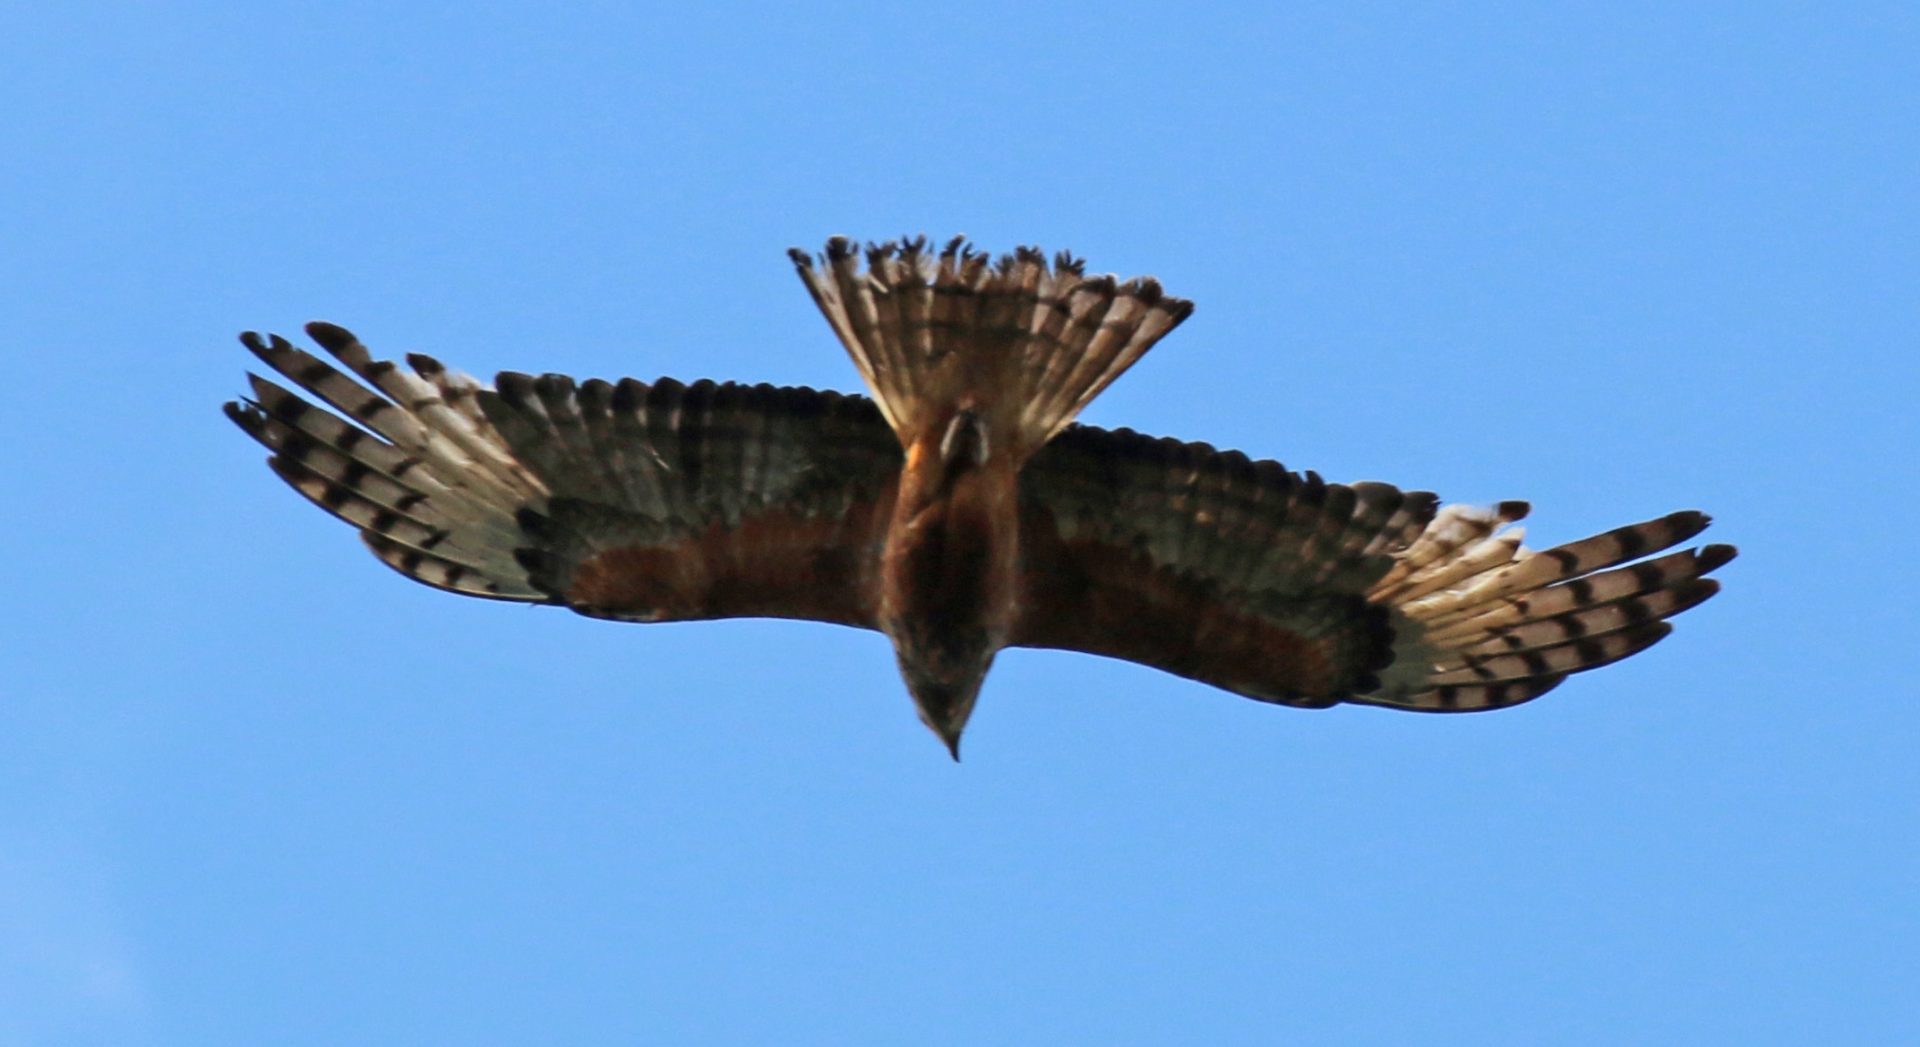 Square-tailed Kite in flight